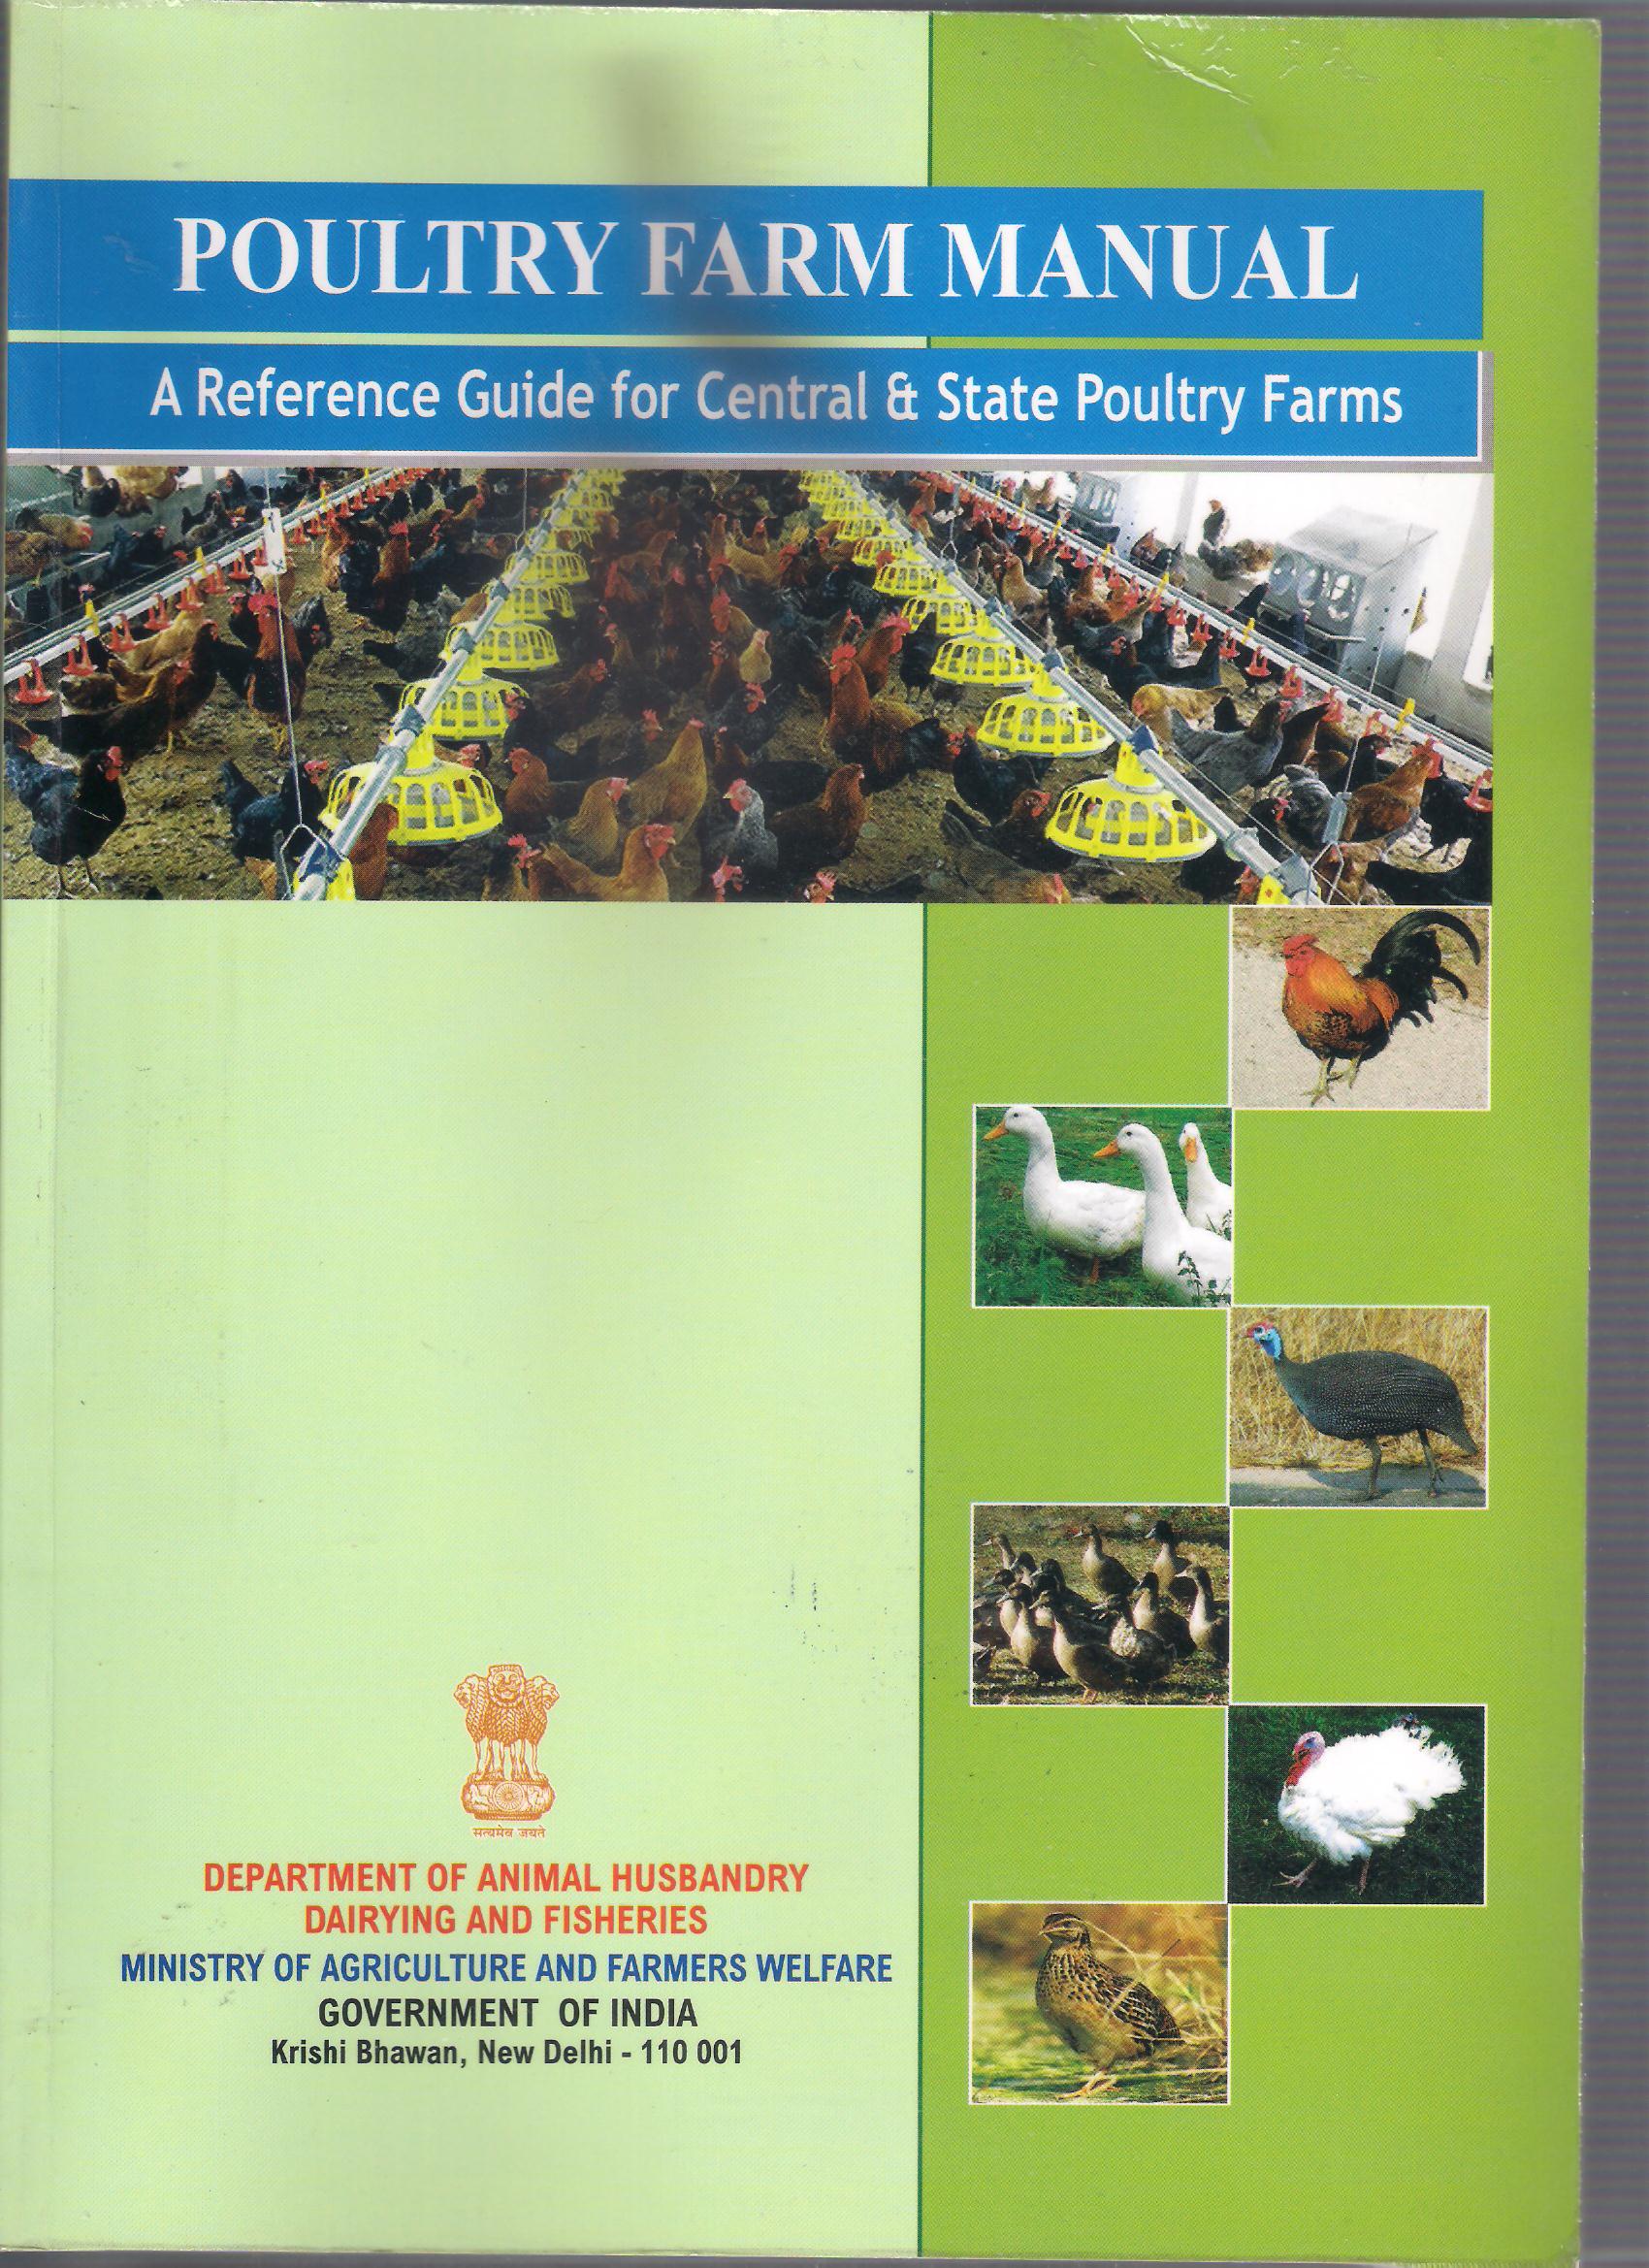 Poultry manual 1